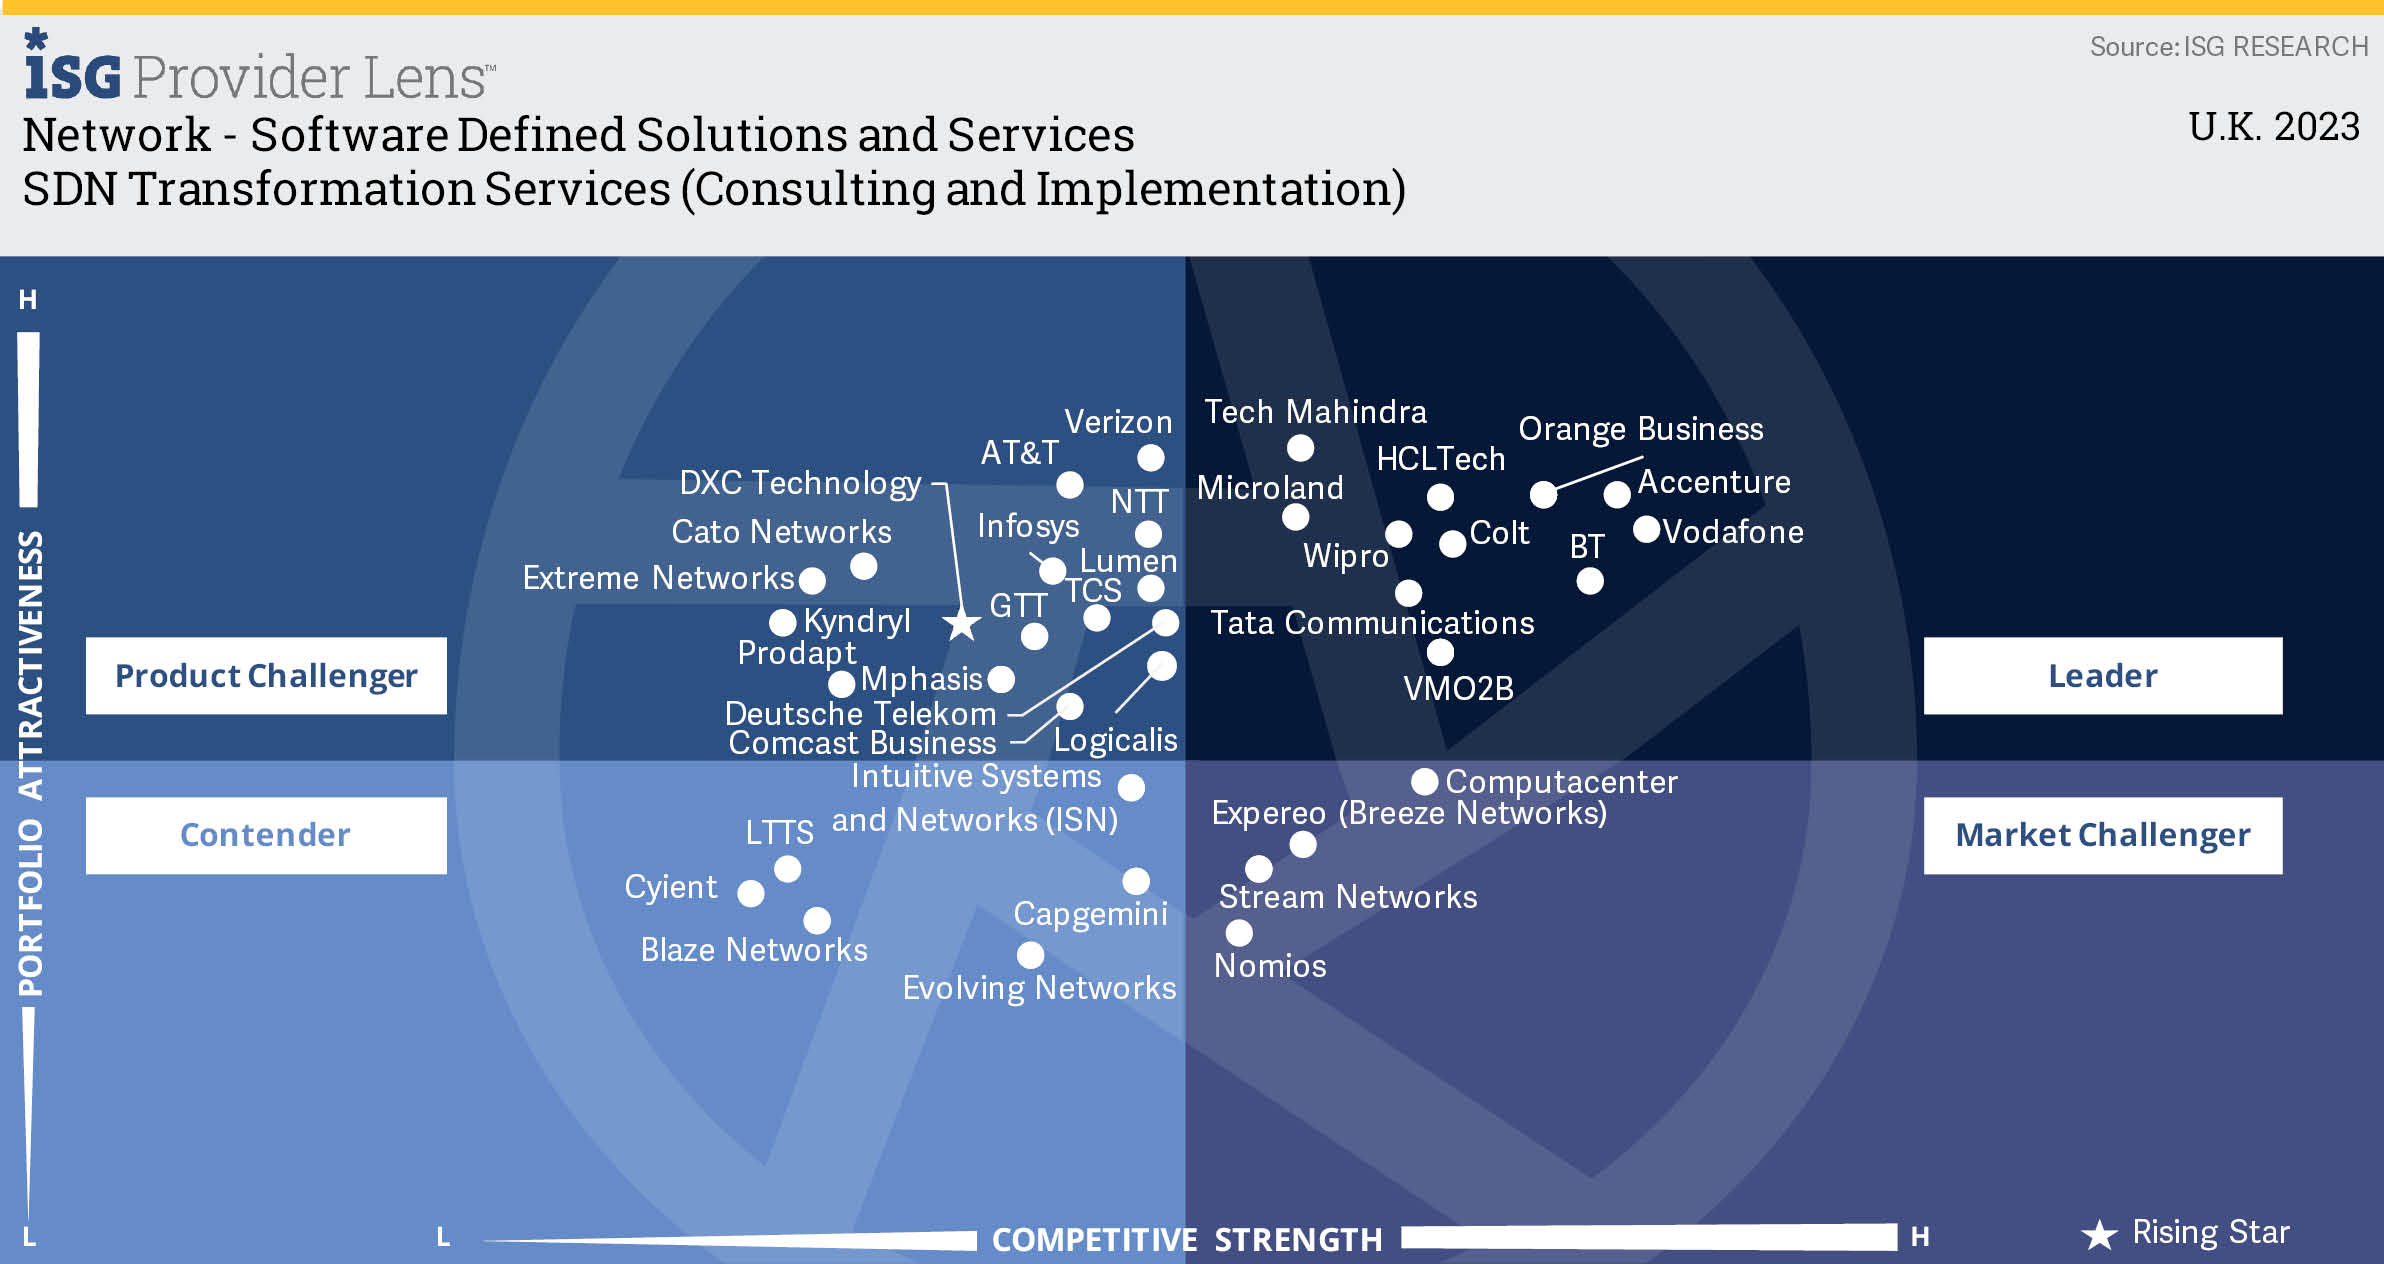 SDN Transformation Services (Consulting & Implementation)